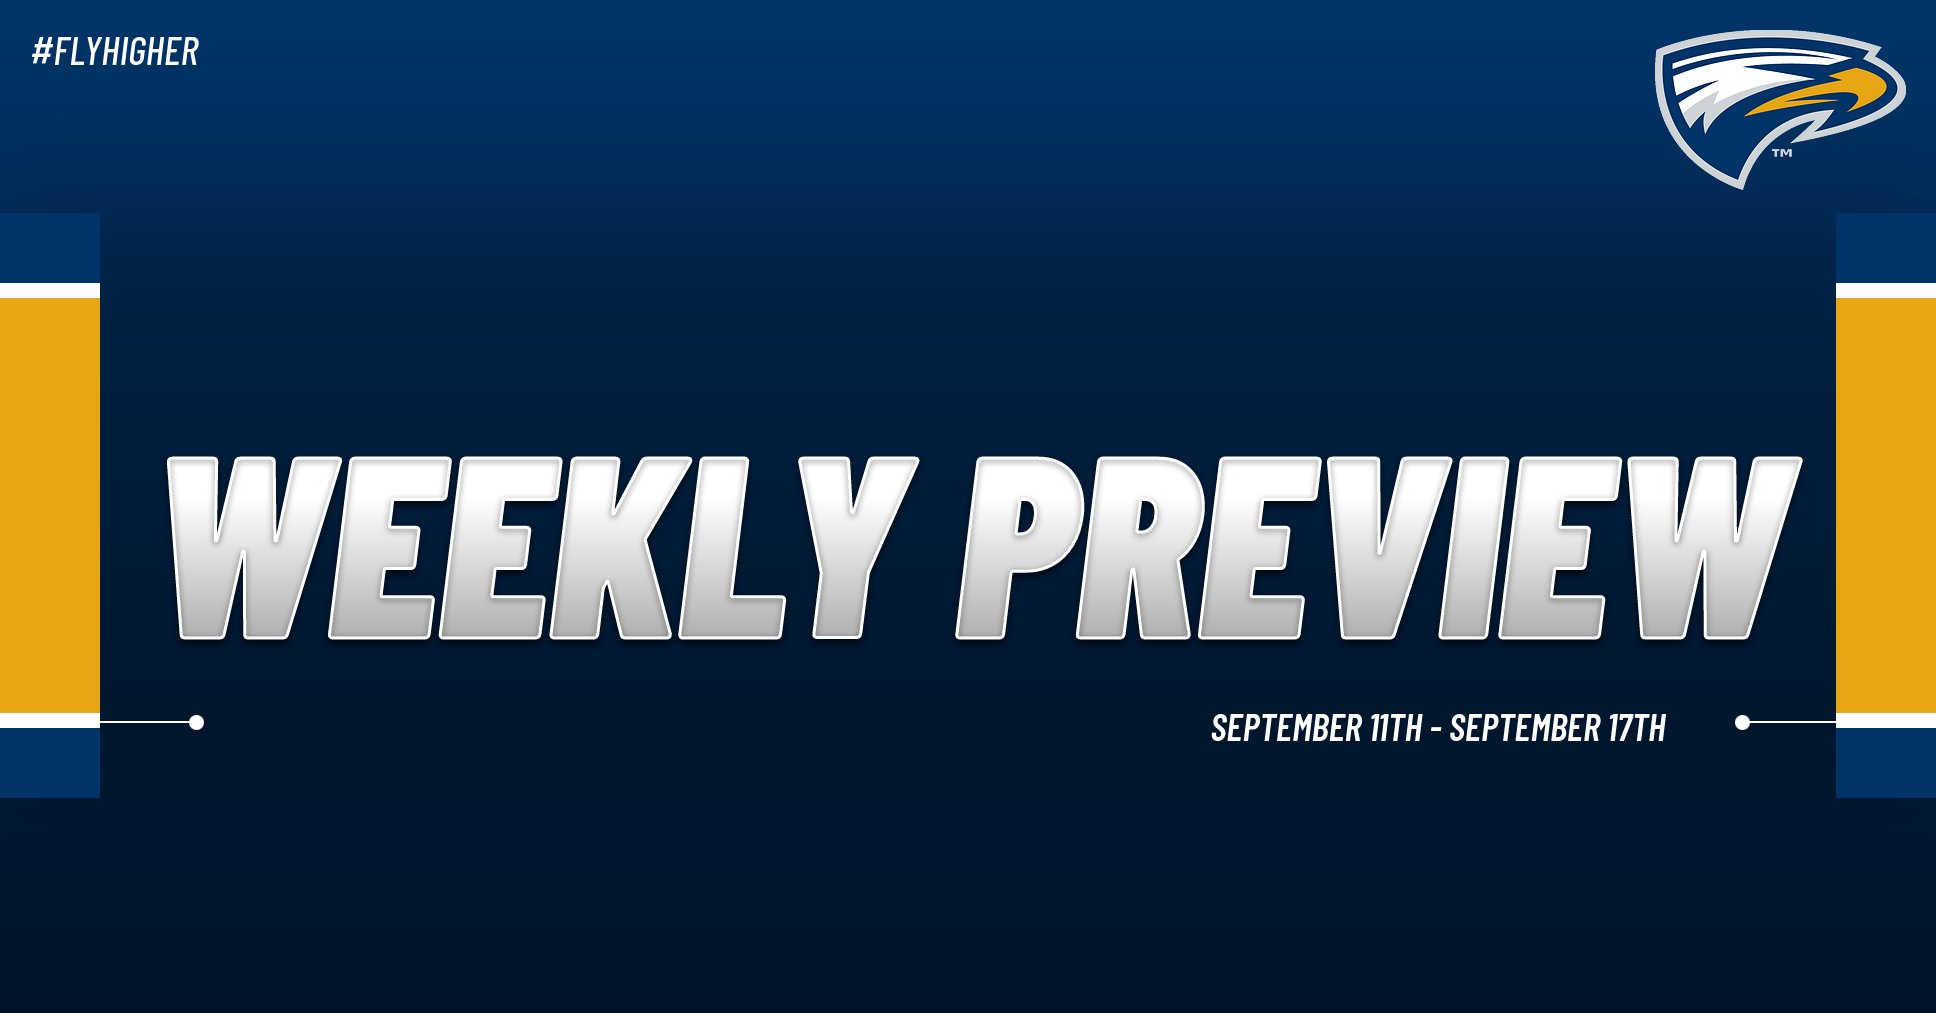 Emory Athletics Weekly Preview: September 11th - September 17th